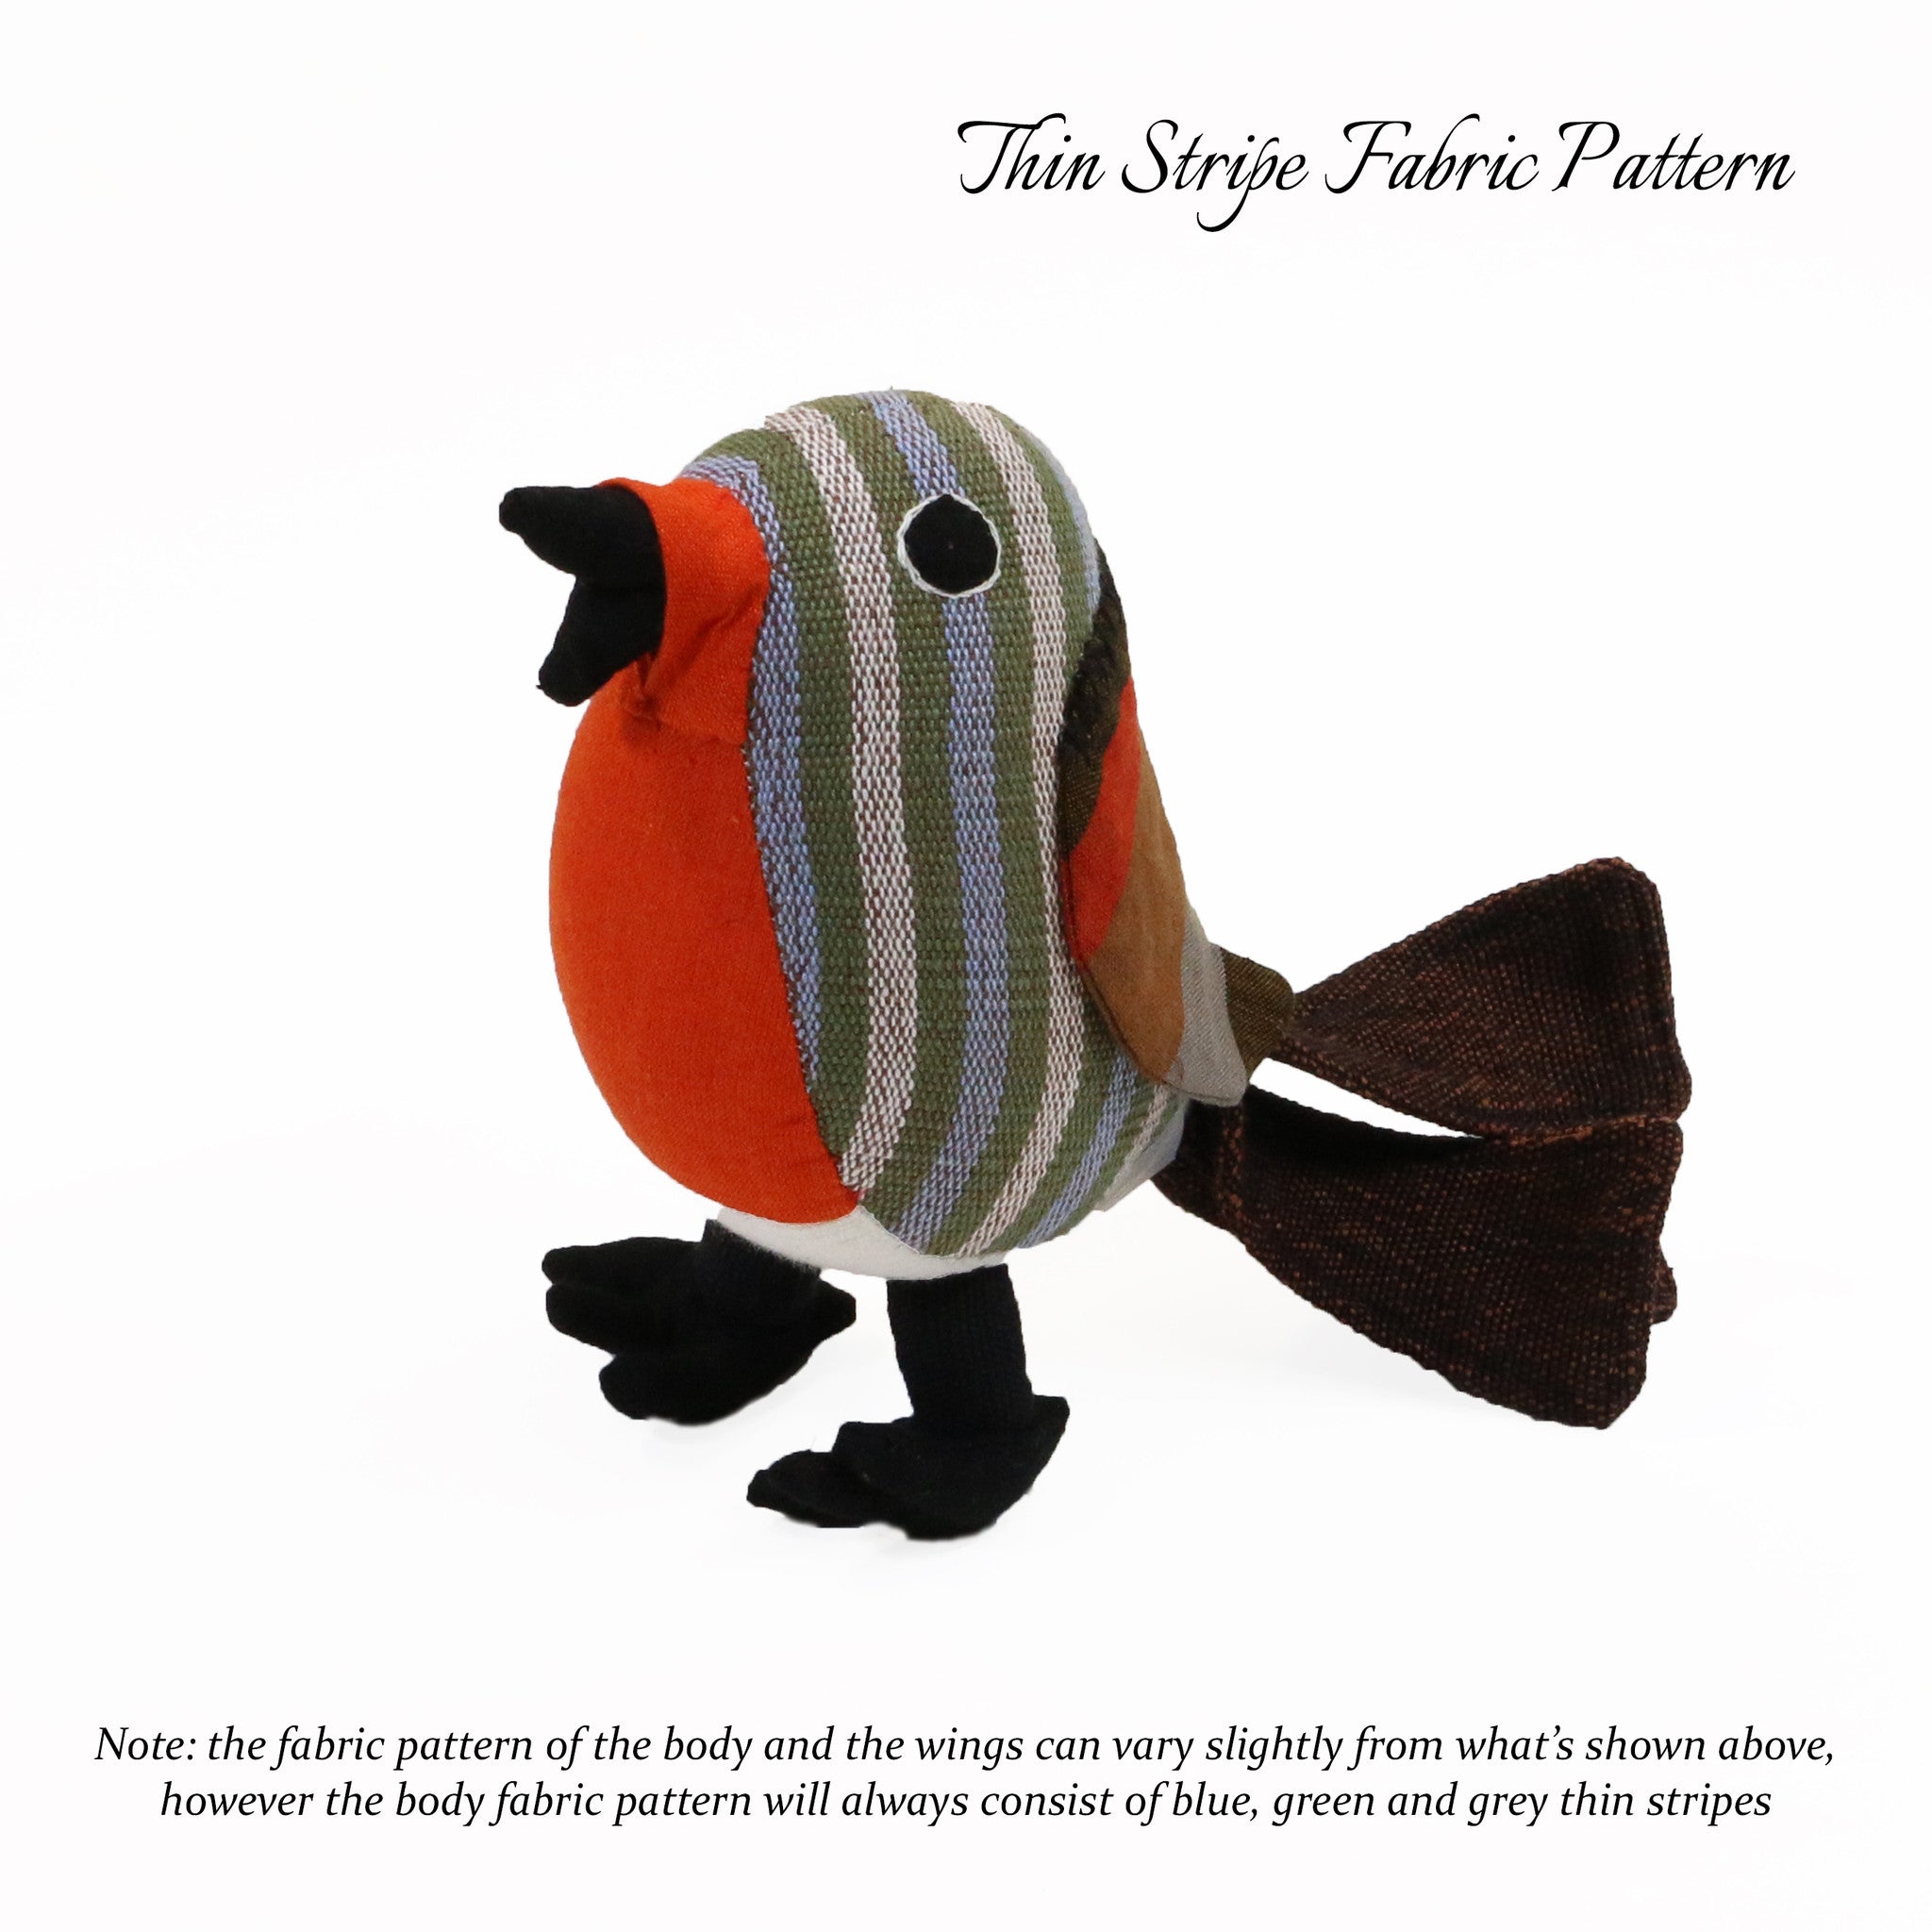 Ricky, the Red Robin (thin stripe fabric pattern, front view)